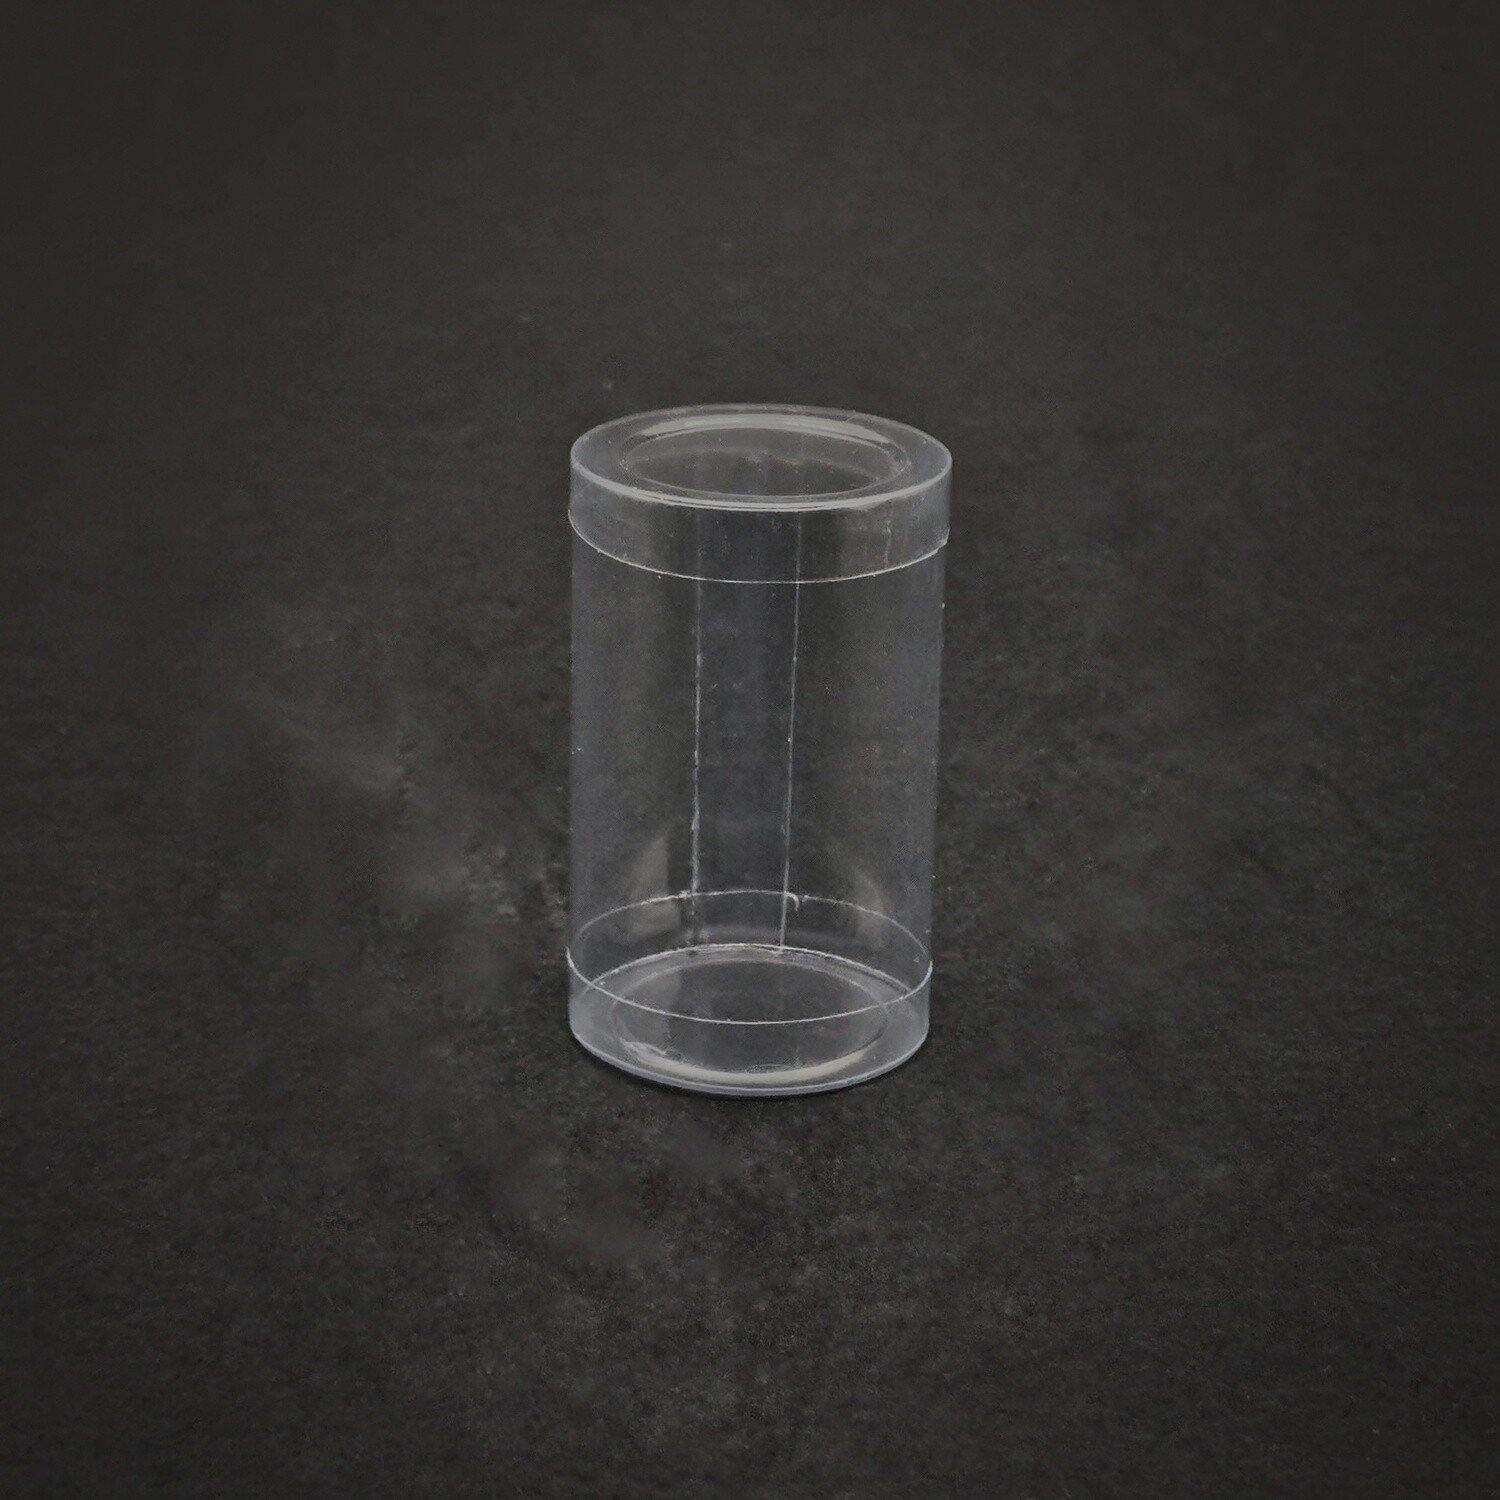 SL0272 1 1/2 X 2 1/2 CANISTER (1.5" DIA) - Kitchen Convenience: Ingredients & Supplies Delivery